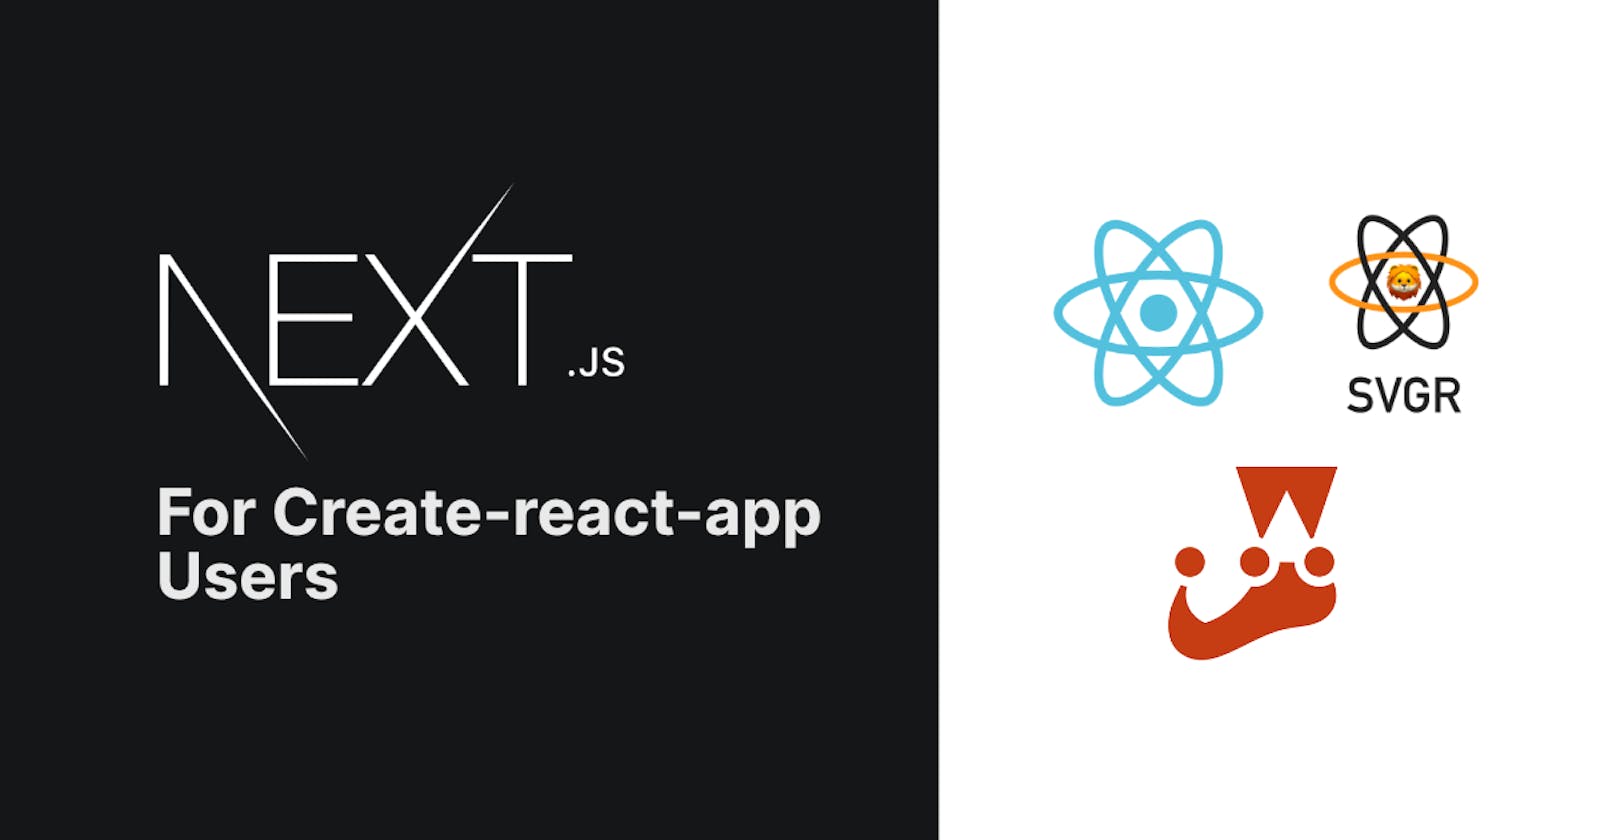 How to Setup Your Next.js Project from Scratch for create-react-app Users (Image, SVG, and Testing Library)